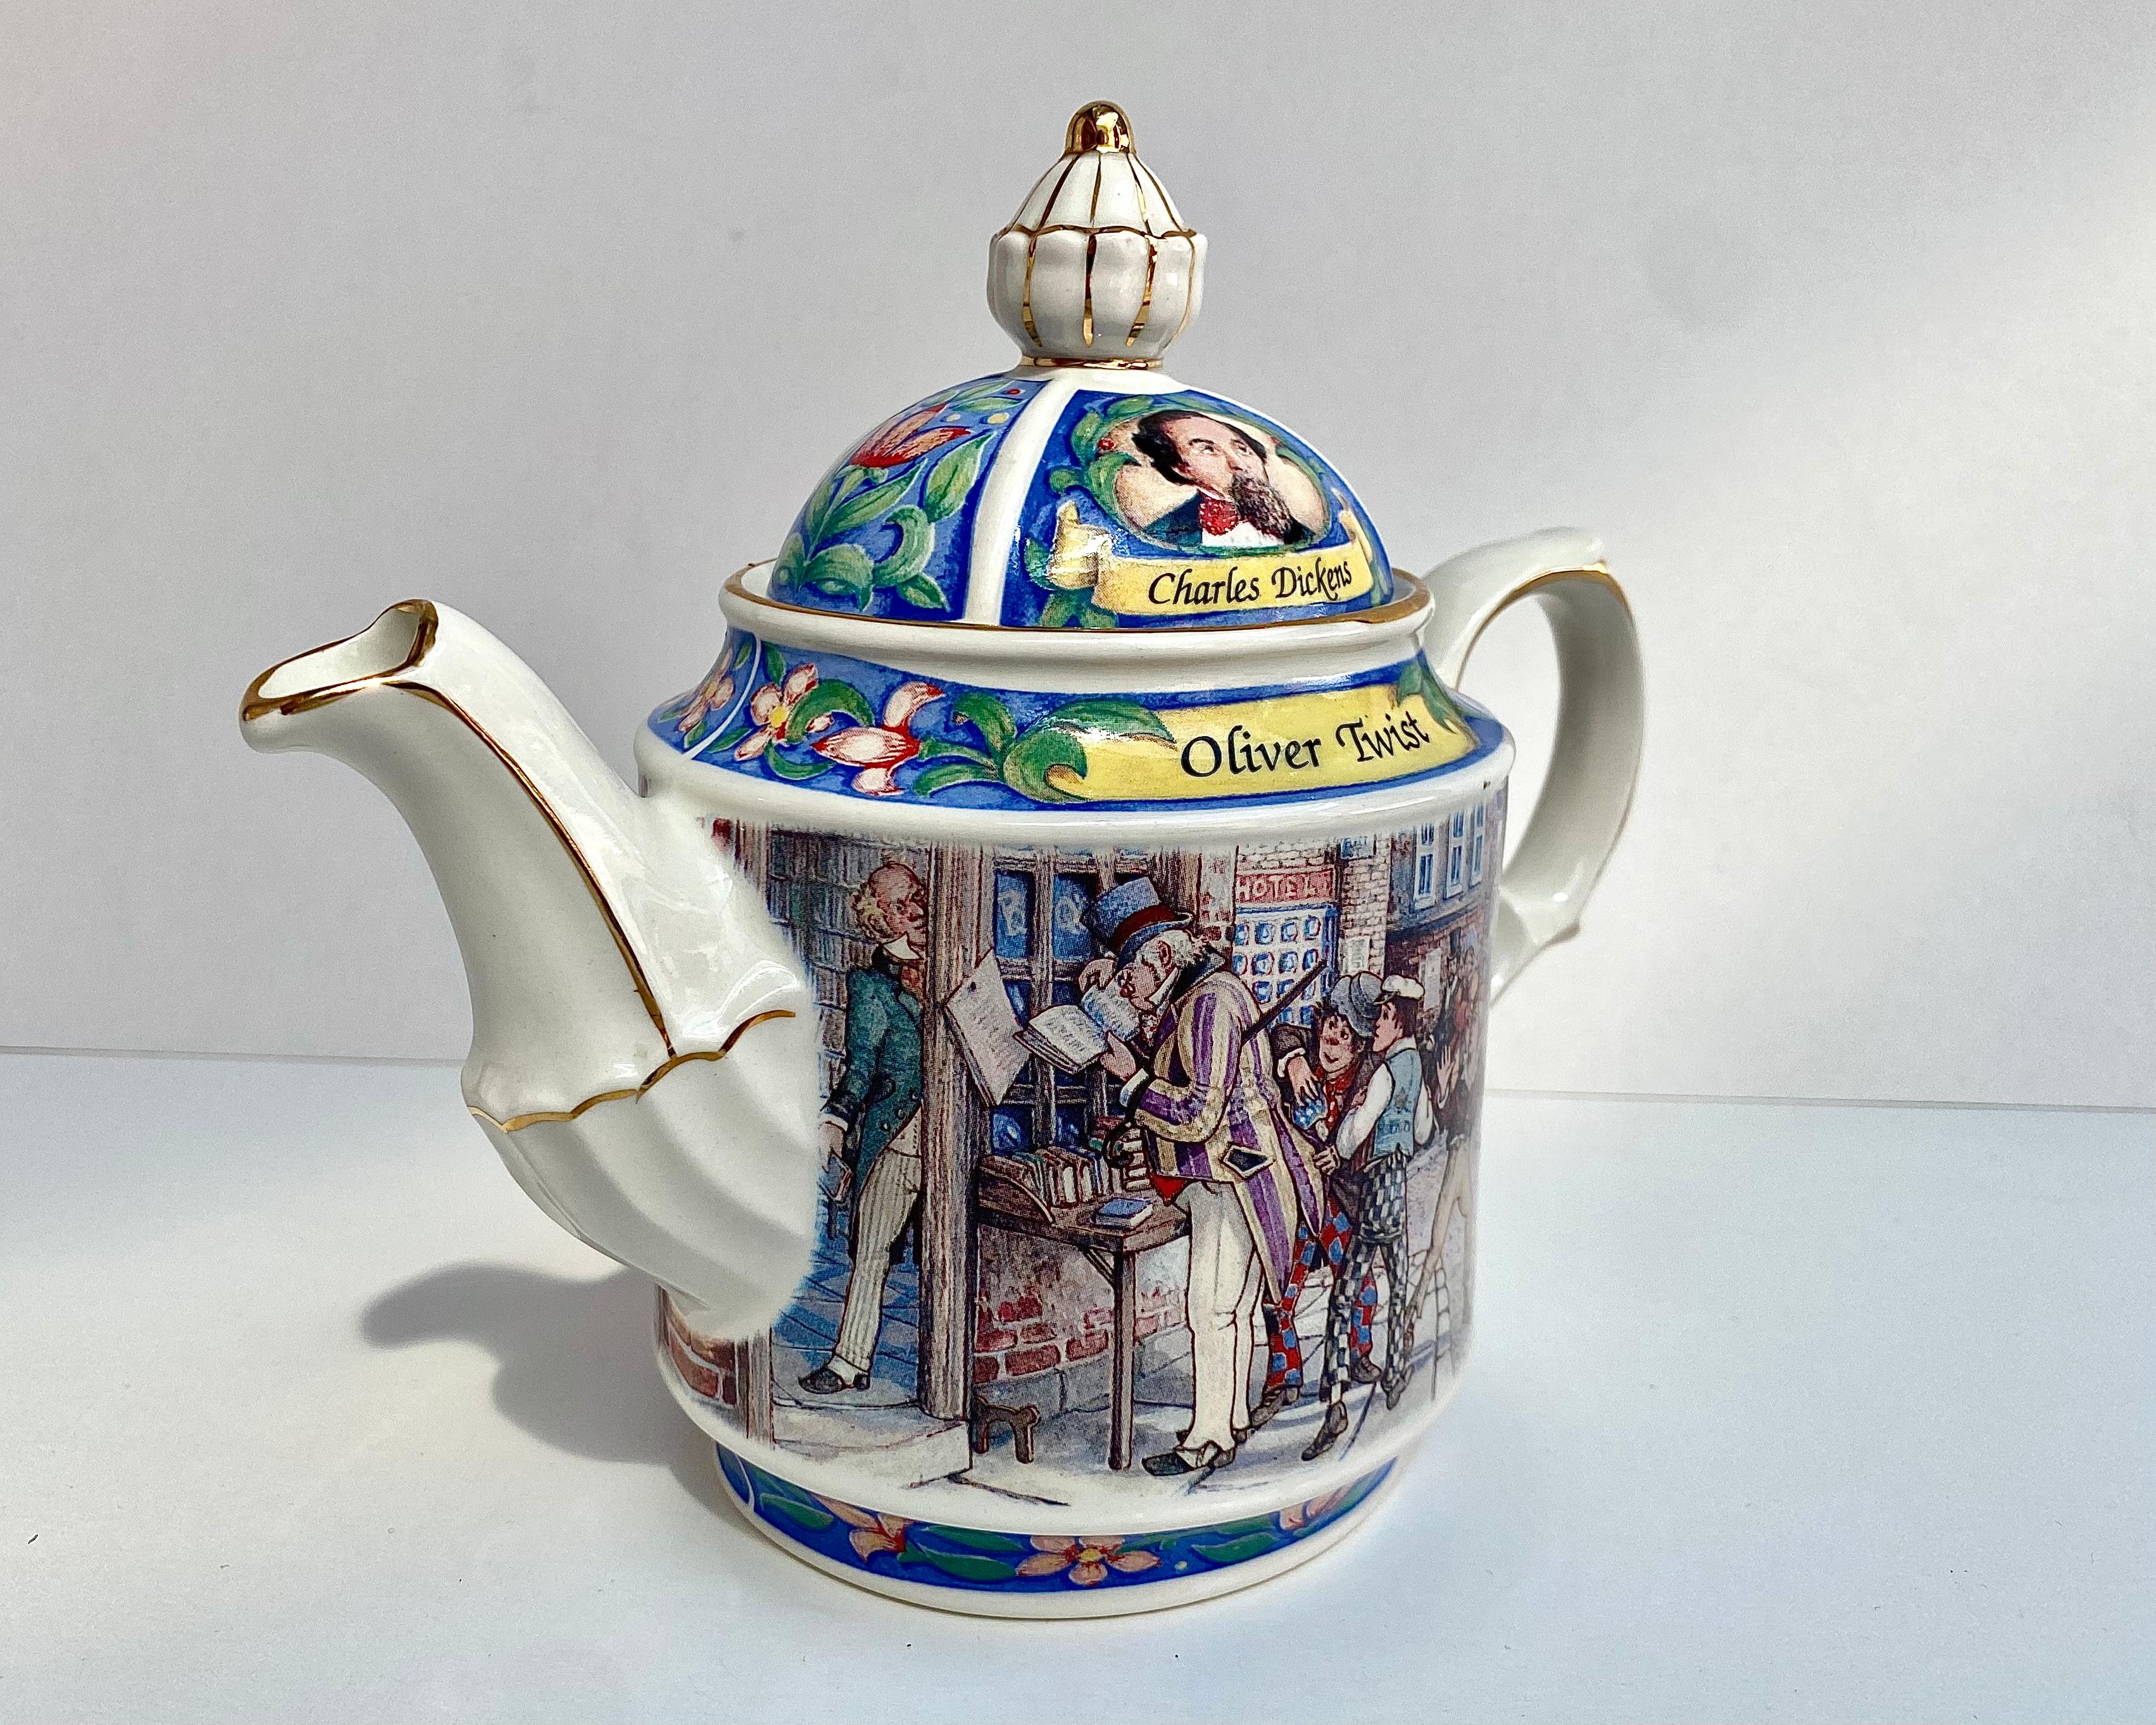 James Sadler Collectible Charles Dickins “Oliver Twist” Tea Pot with decal and gilding.

Made in England.

This collectable teapot by Sadler features a scene from Oliver Twist by Charles Dickens, decorated in bright colors. The details are so